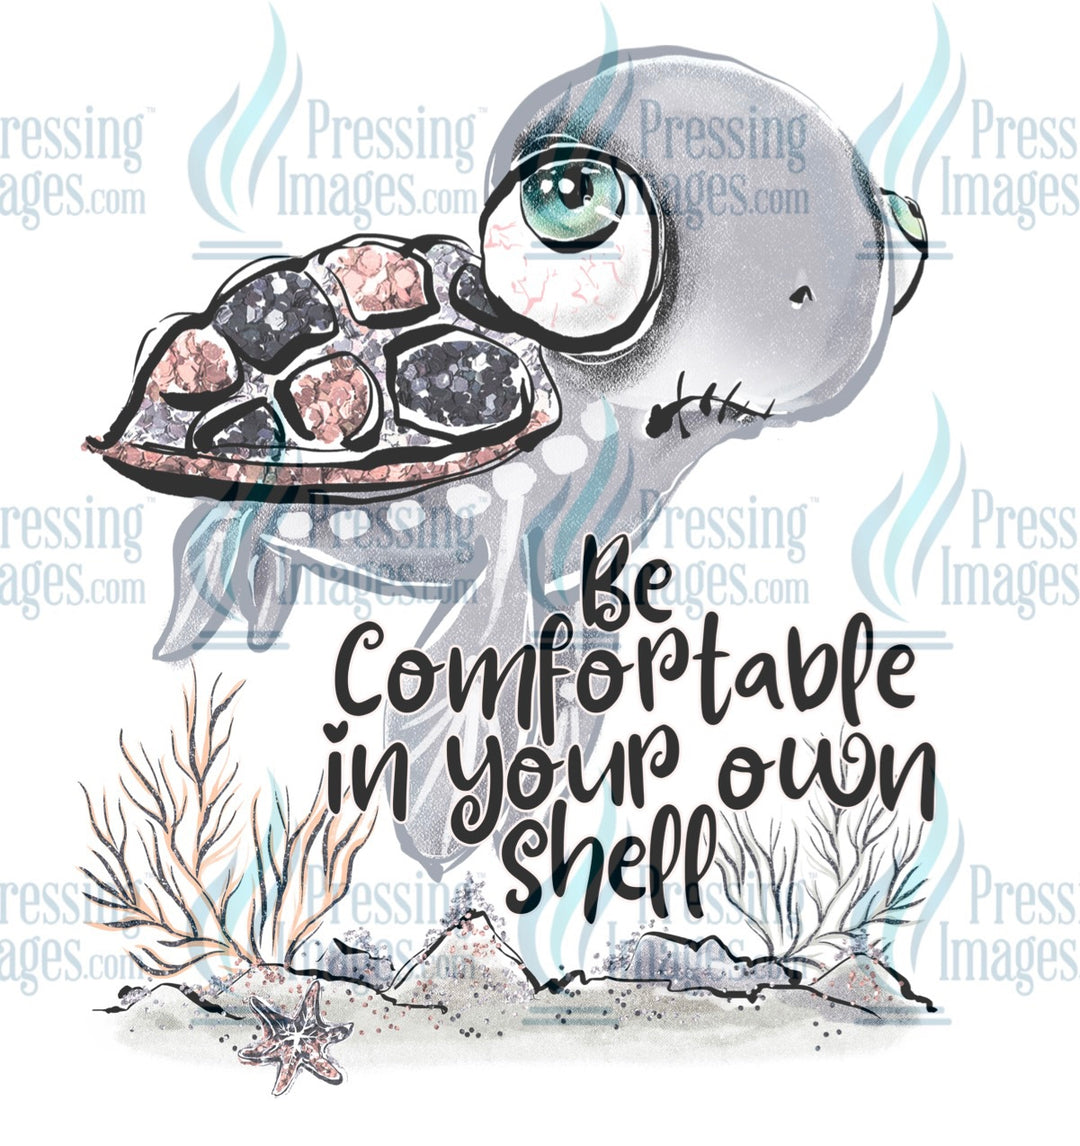 Decal: 341 Be comfortable in your own shell